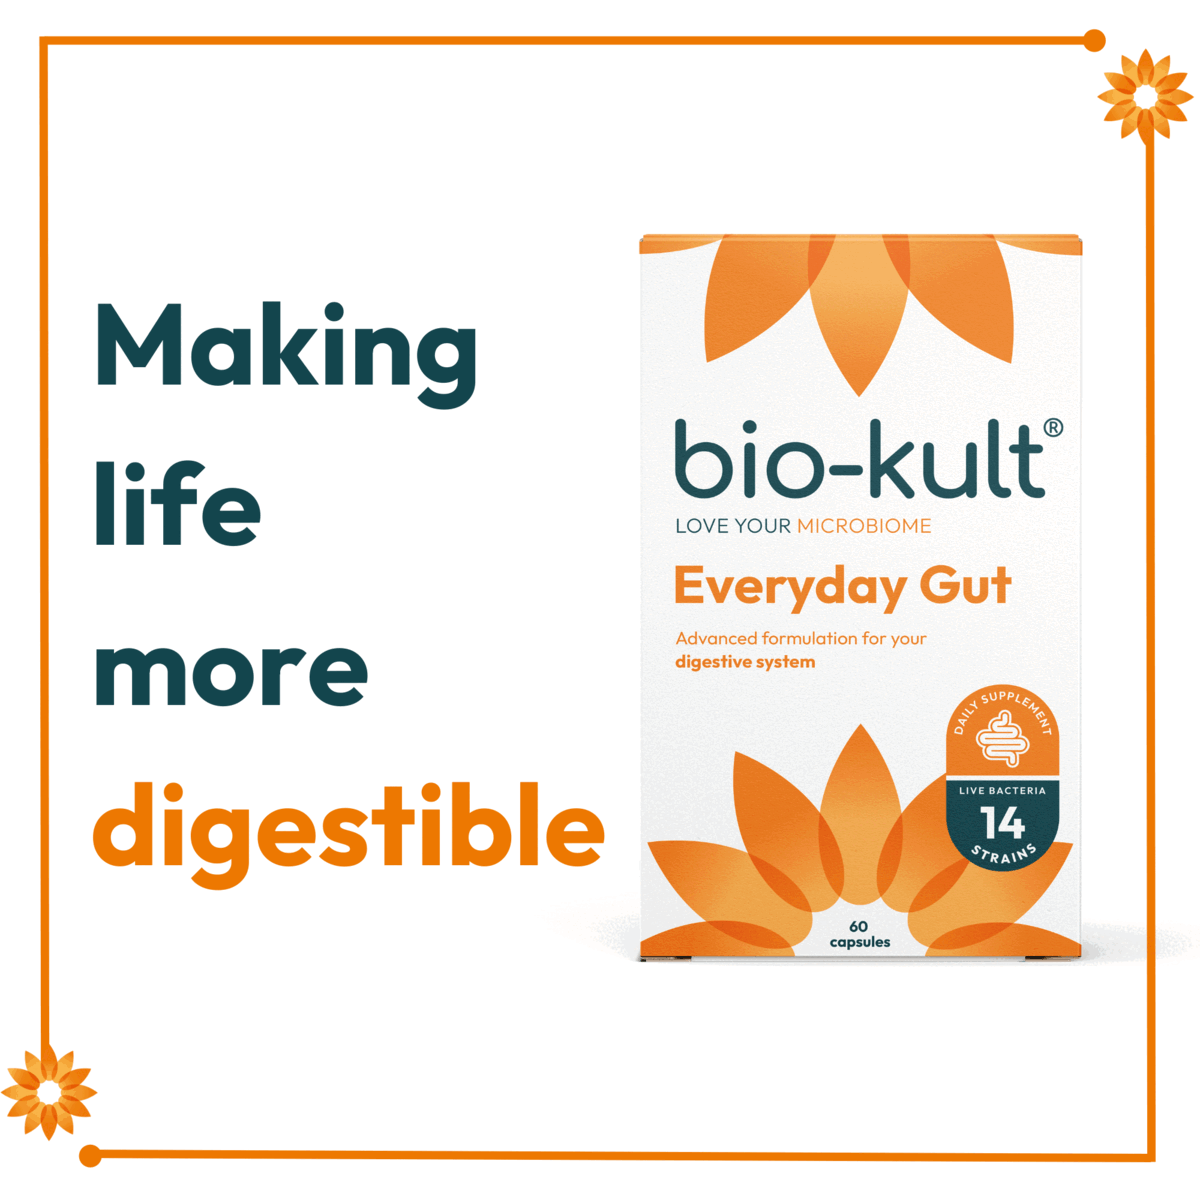 Making life more digestible, the little flower with a whole lot of power, new look some award winning bacteria inside!higly recommended - life saver, fantastic - i just can't believe it, great product, we can't hold in our exictment!